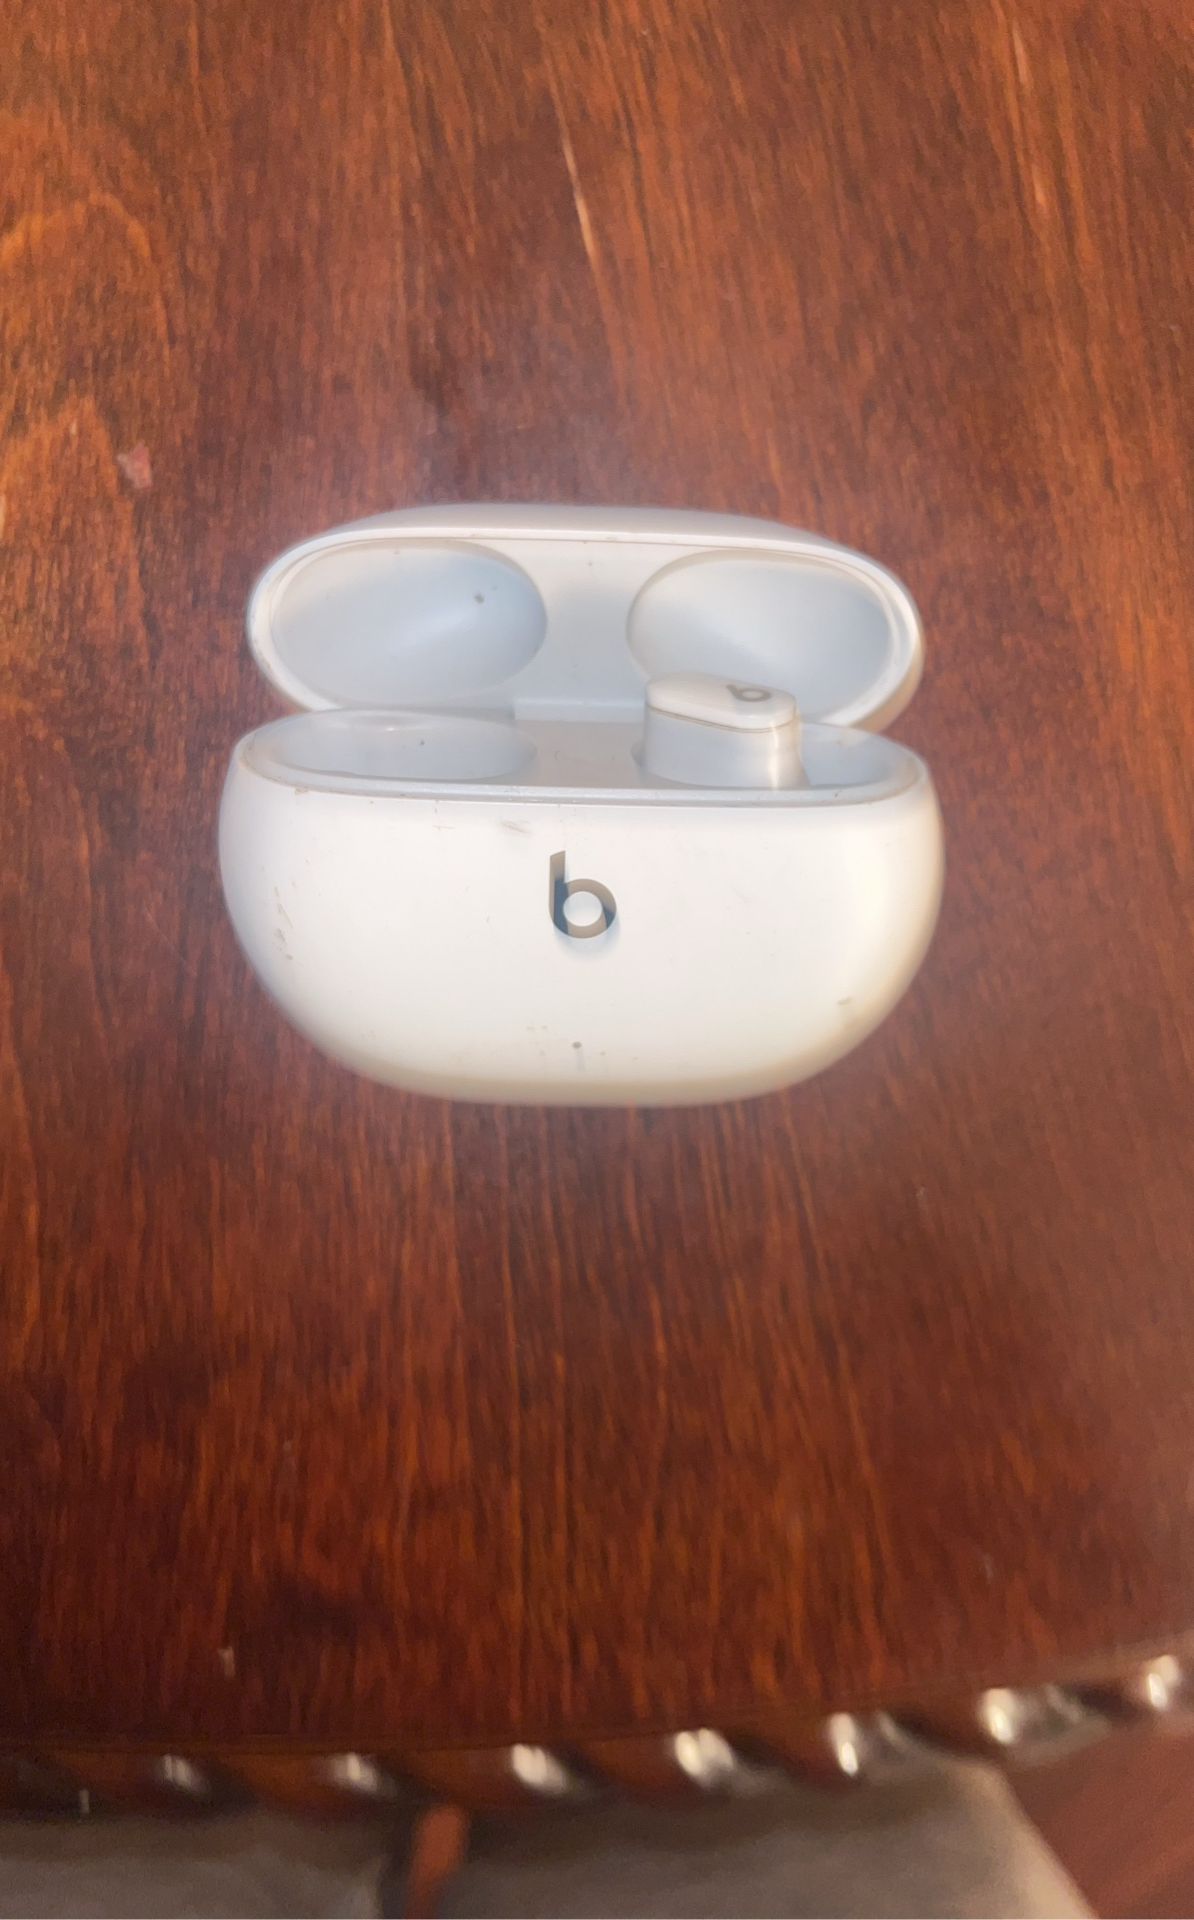 BEATS STUDIO AIRPODS (ONLY RIGHT BUD)